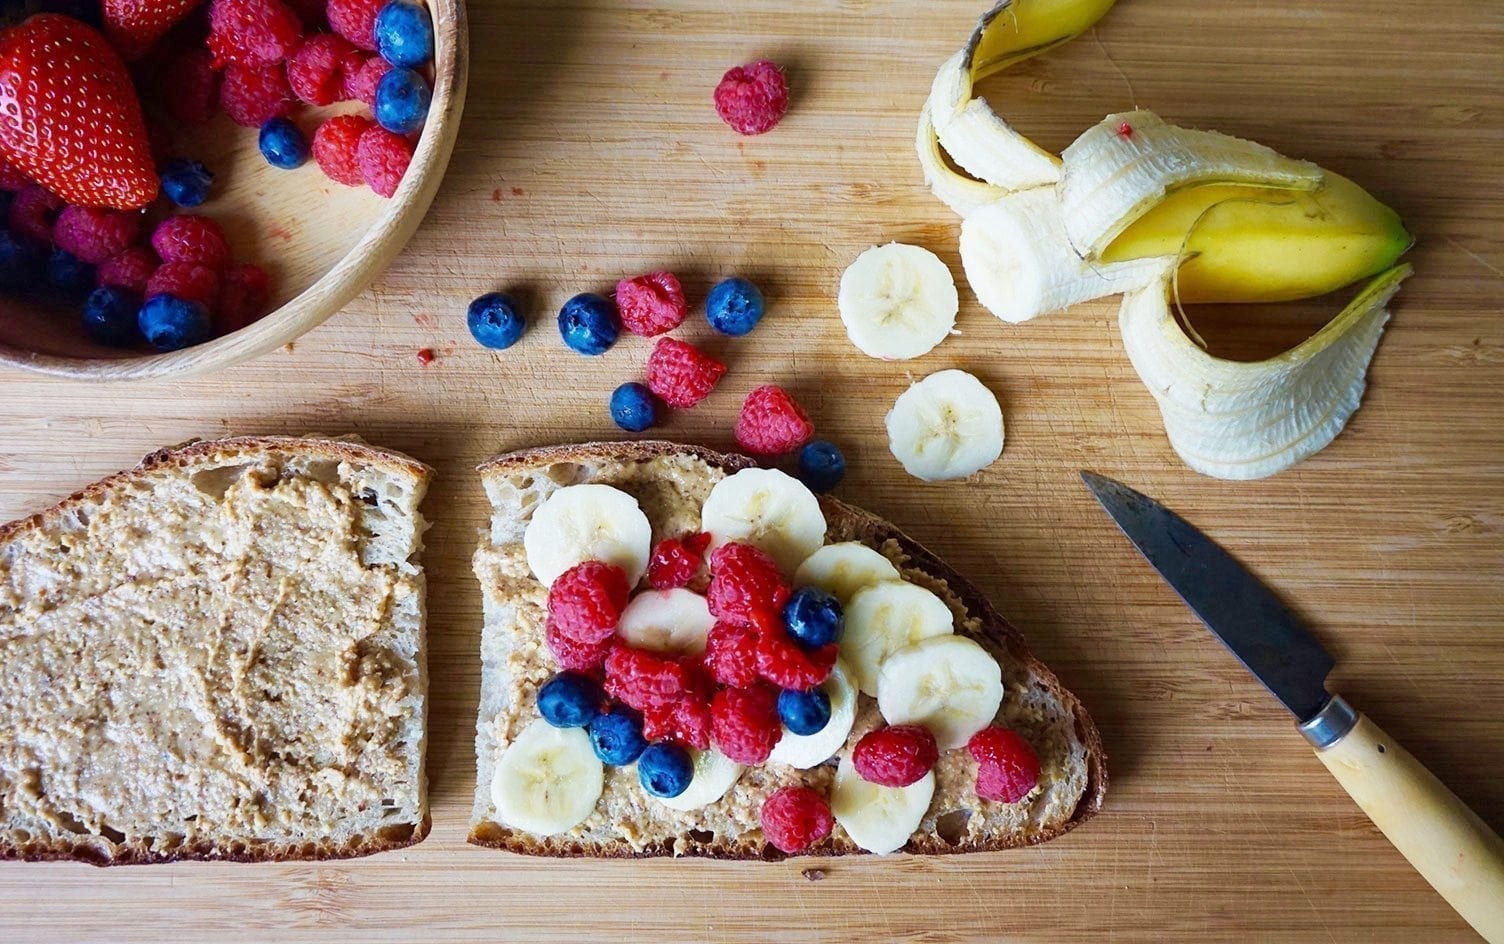 12 Secretly Healthy & Budget-Friendly Snacks Your Kids Will Love